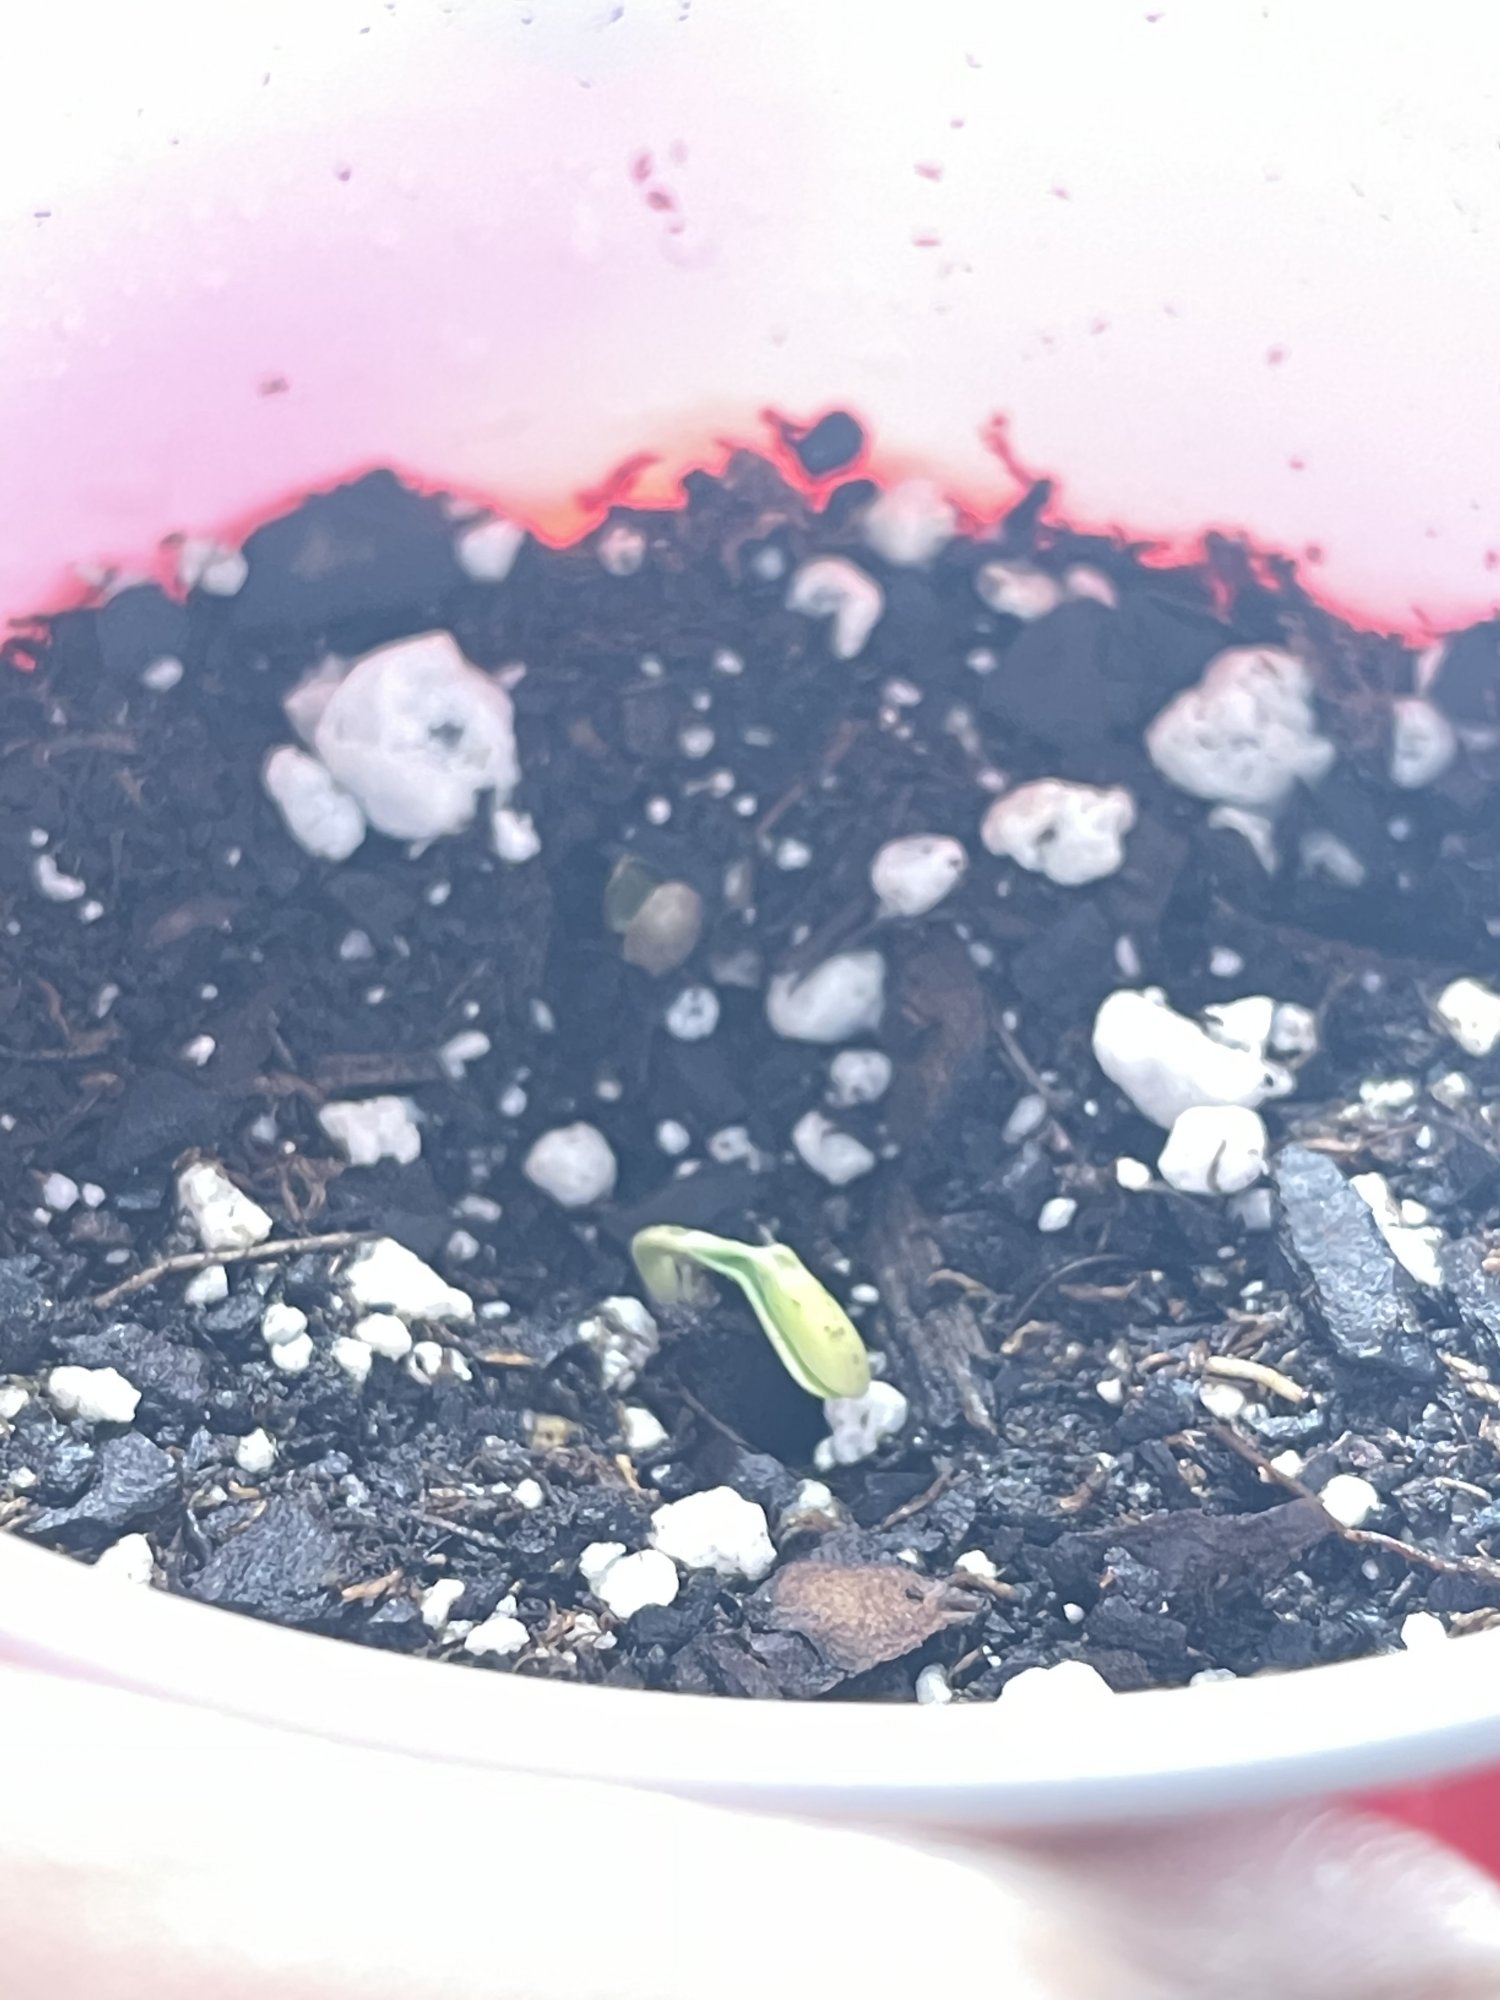 Just sprouted today is it ok or did i fck something up again